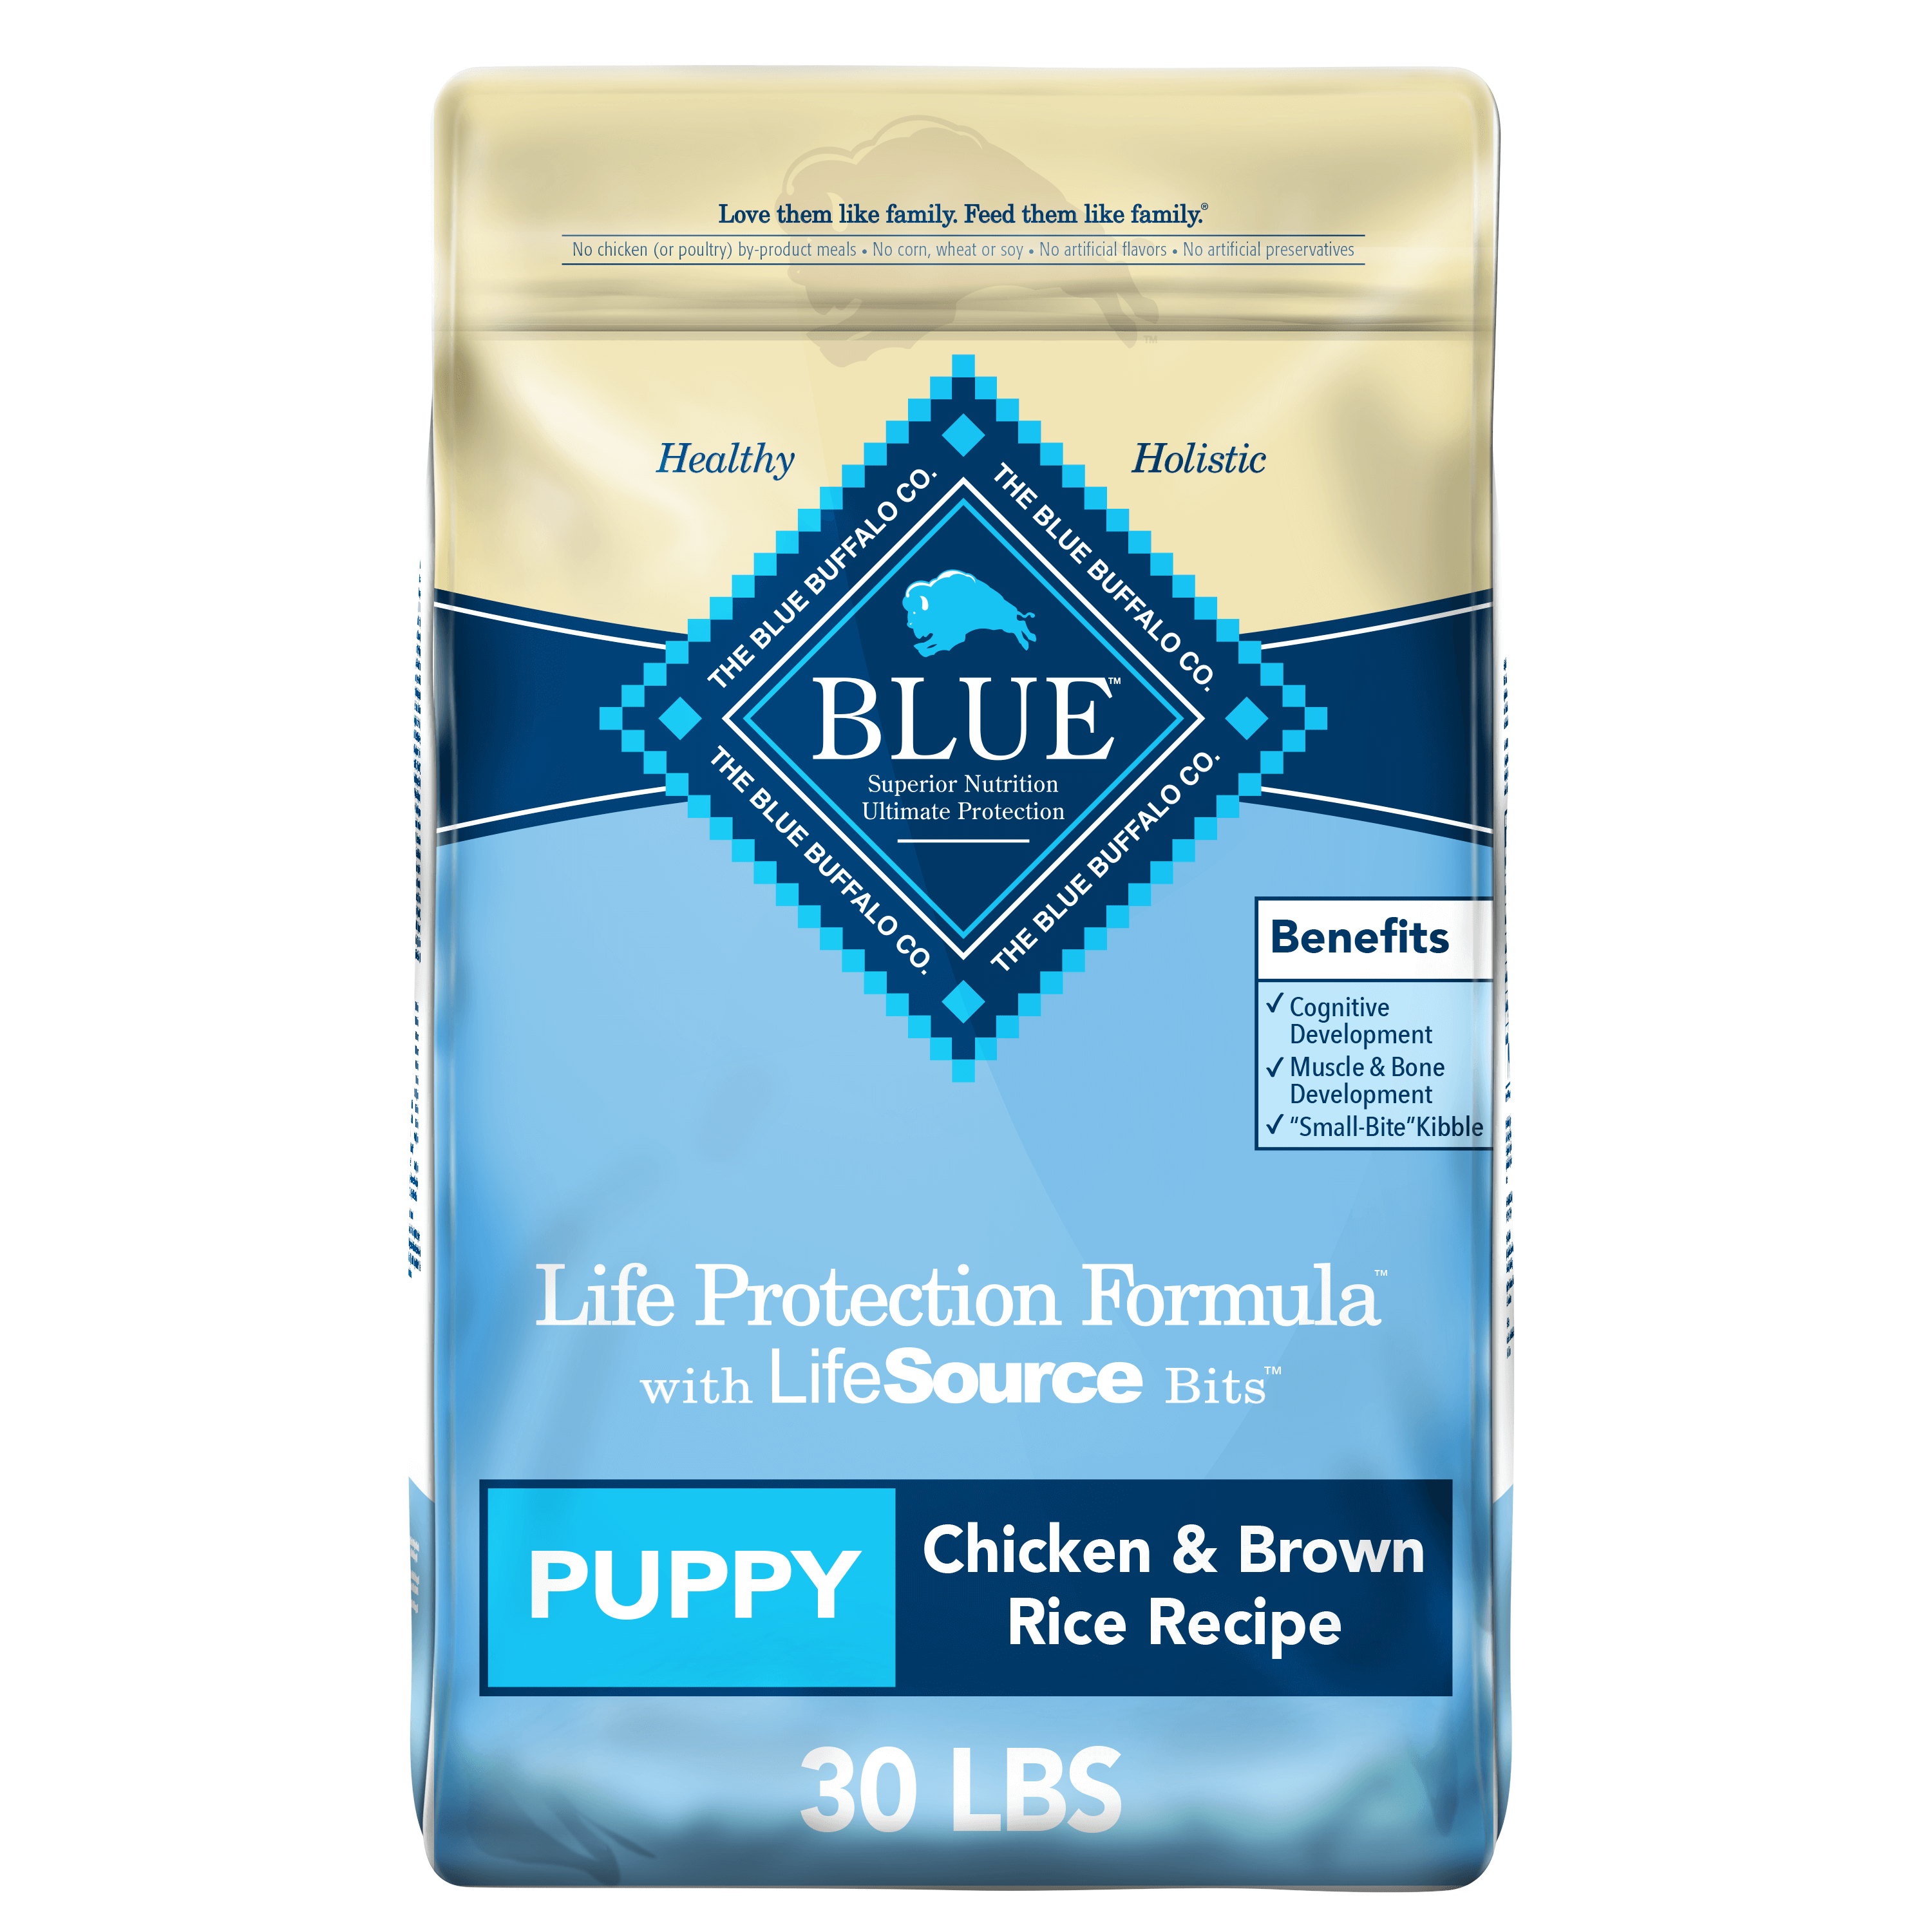 Blue Buffalo Life Protection Formula Chicken and Brown Rice Dry Dog Food for Puppies, Whole Grain, 30 lb. Bag - image 1 of 11